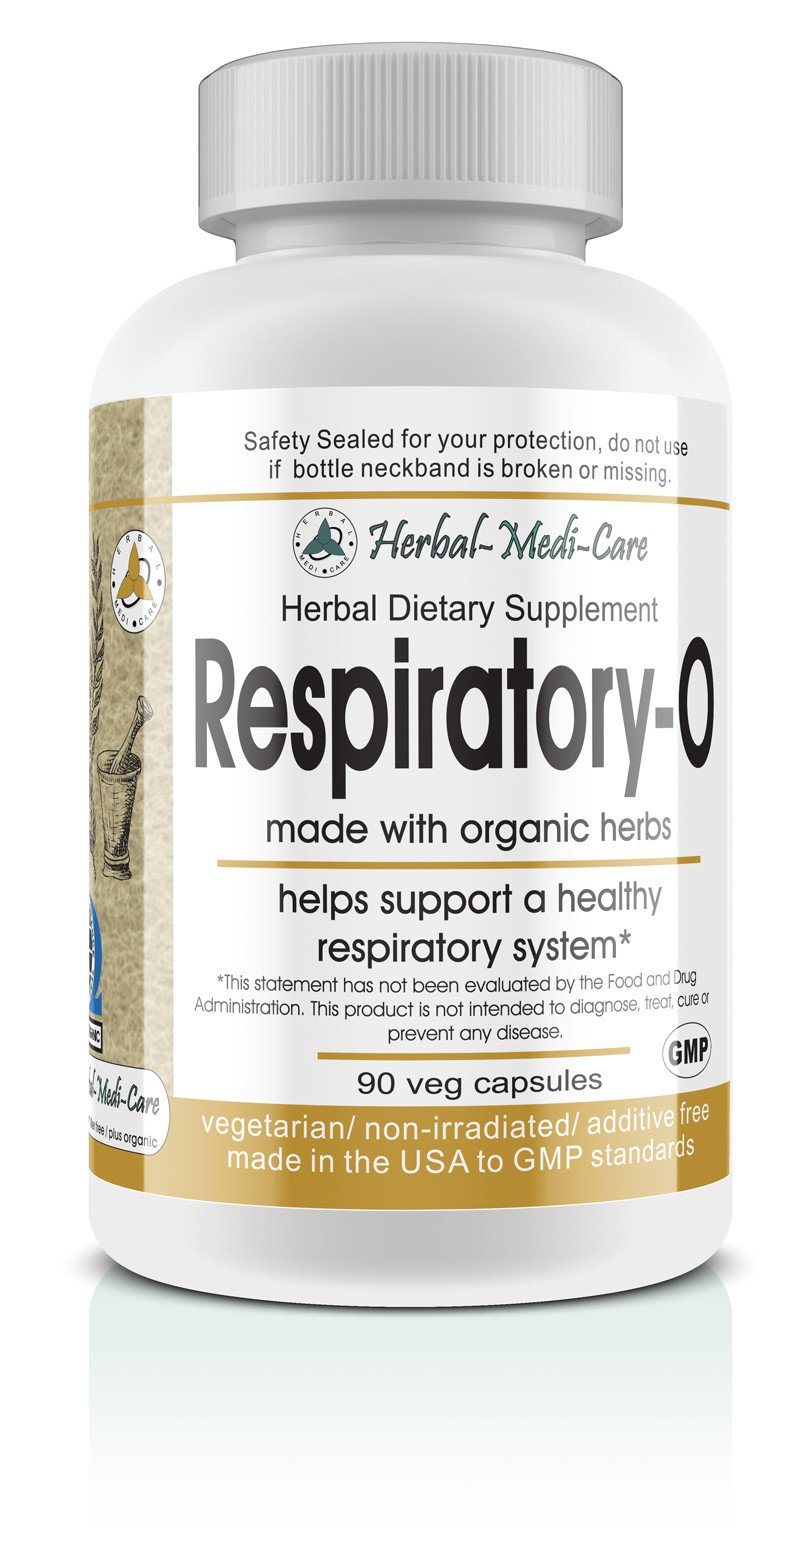 Herbal-Medi-Care Whole Food Respiratory-O (Lung) Vegetarian Capsules; 90-Count, Made with Organic - Herbal-Medi-Care Whole Food Respiratory-O (Lung) Vegetarian Capsules; 90-Count, Made with Organic - Herbal-Medi-Care Whole Food Respiratory-O (Lung) Vegetarian Capsules; 90-Count, Made with Organic